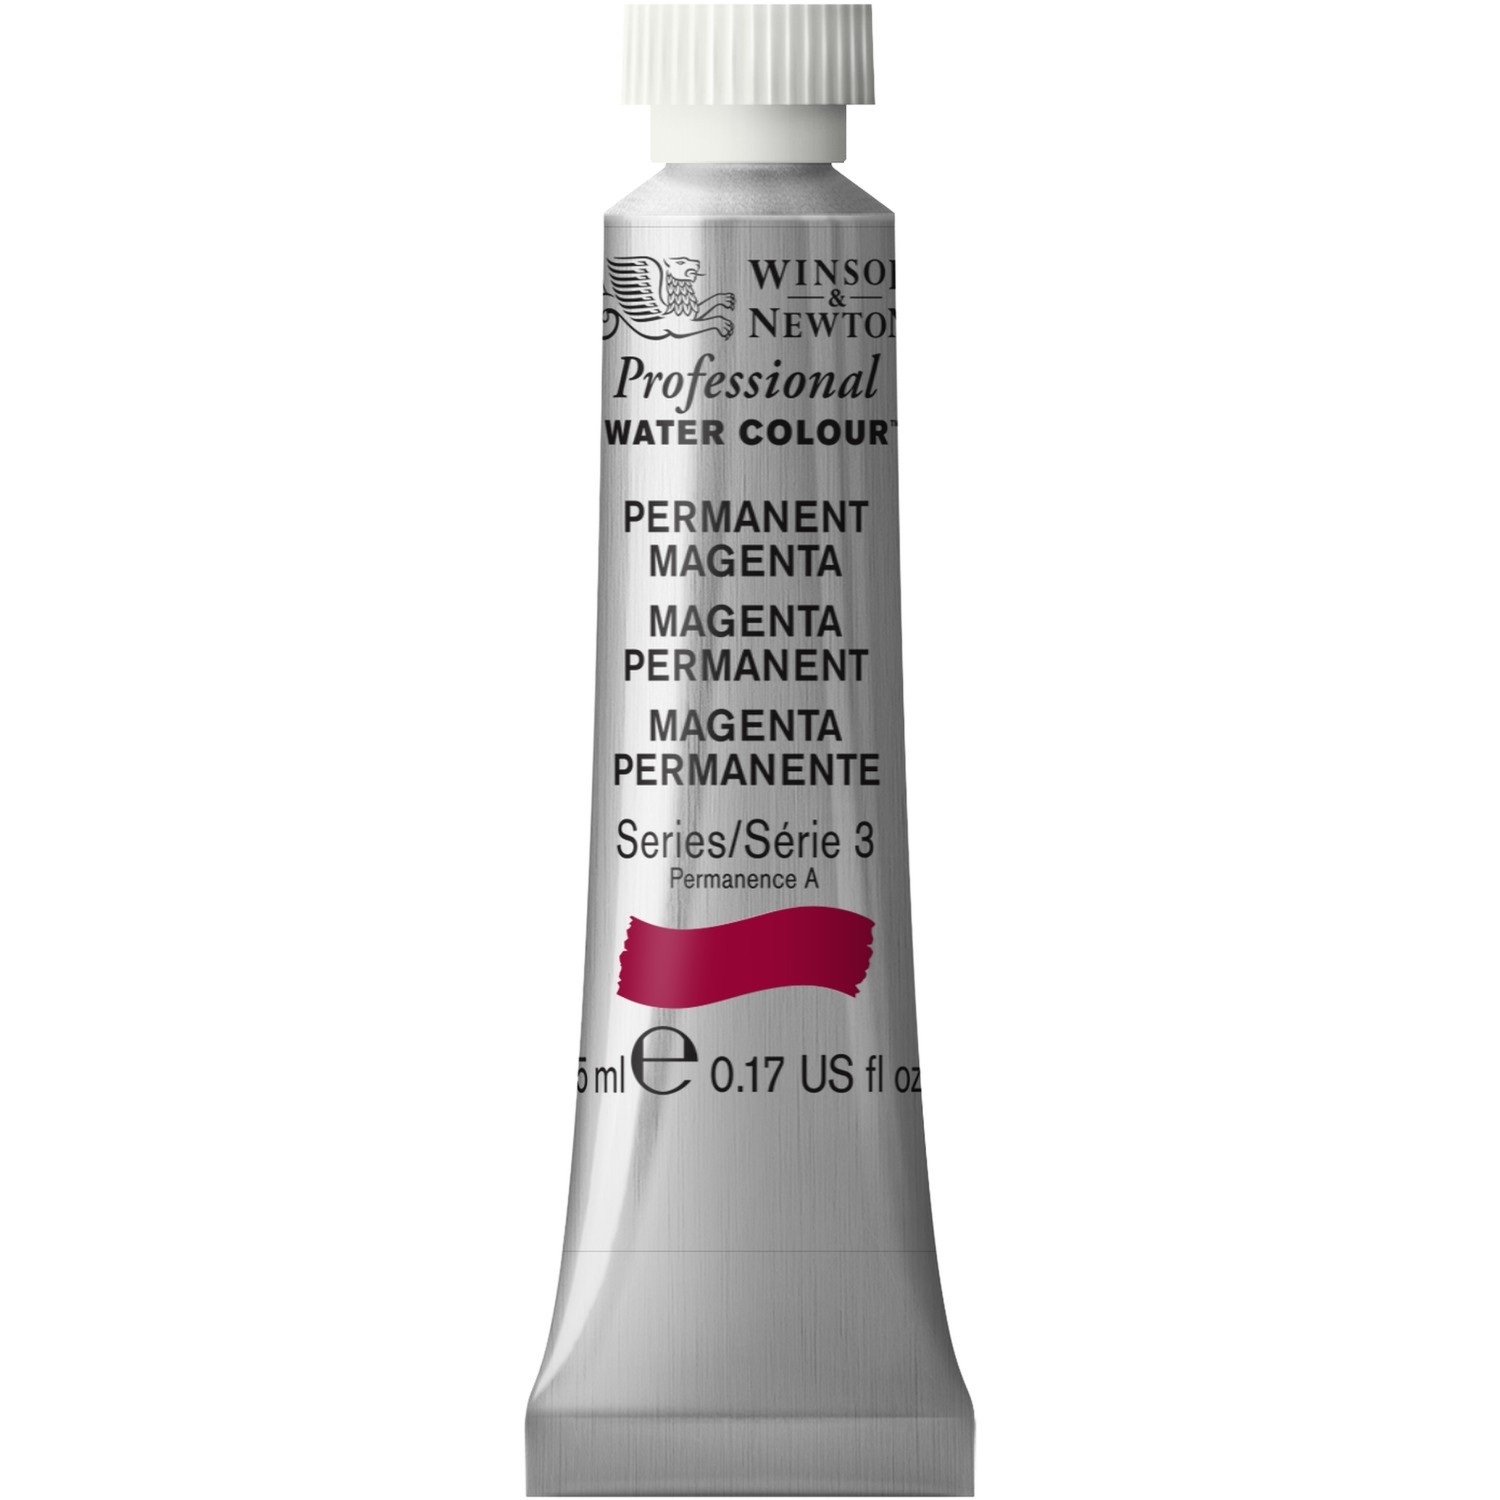 Winsor and Newton Magenta Professional Watercolour Paint 5ml Image 1